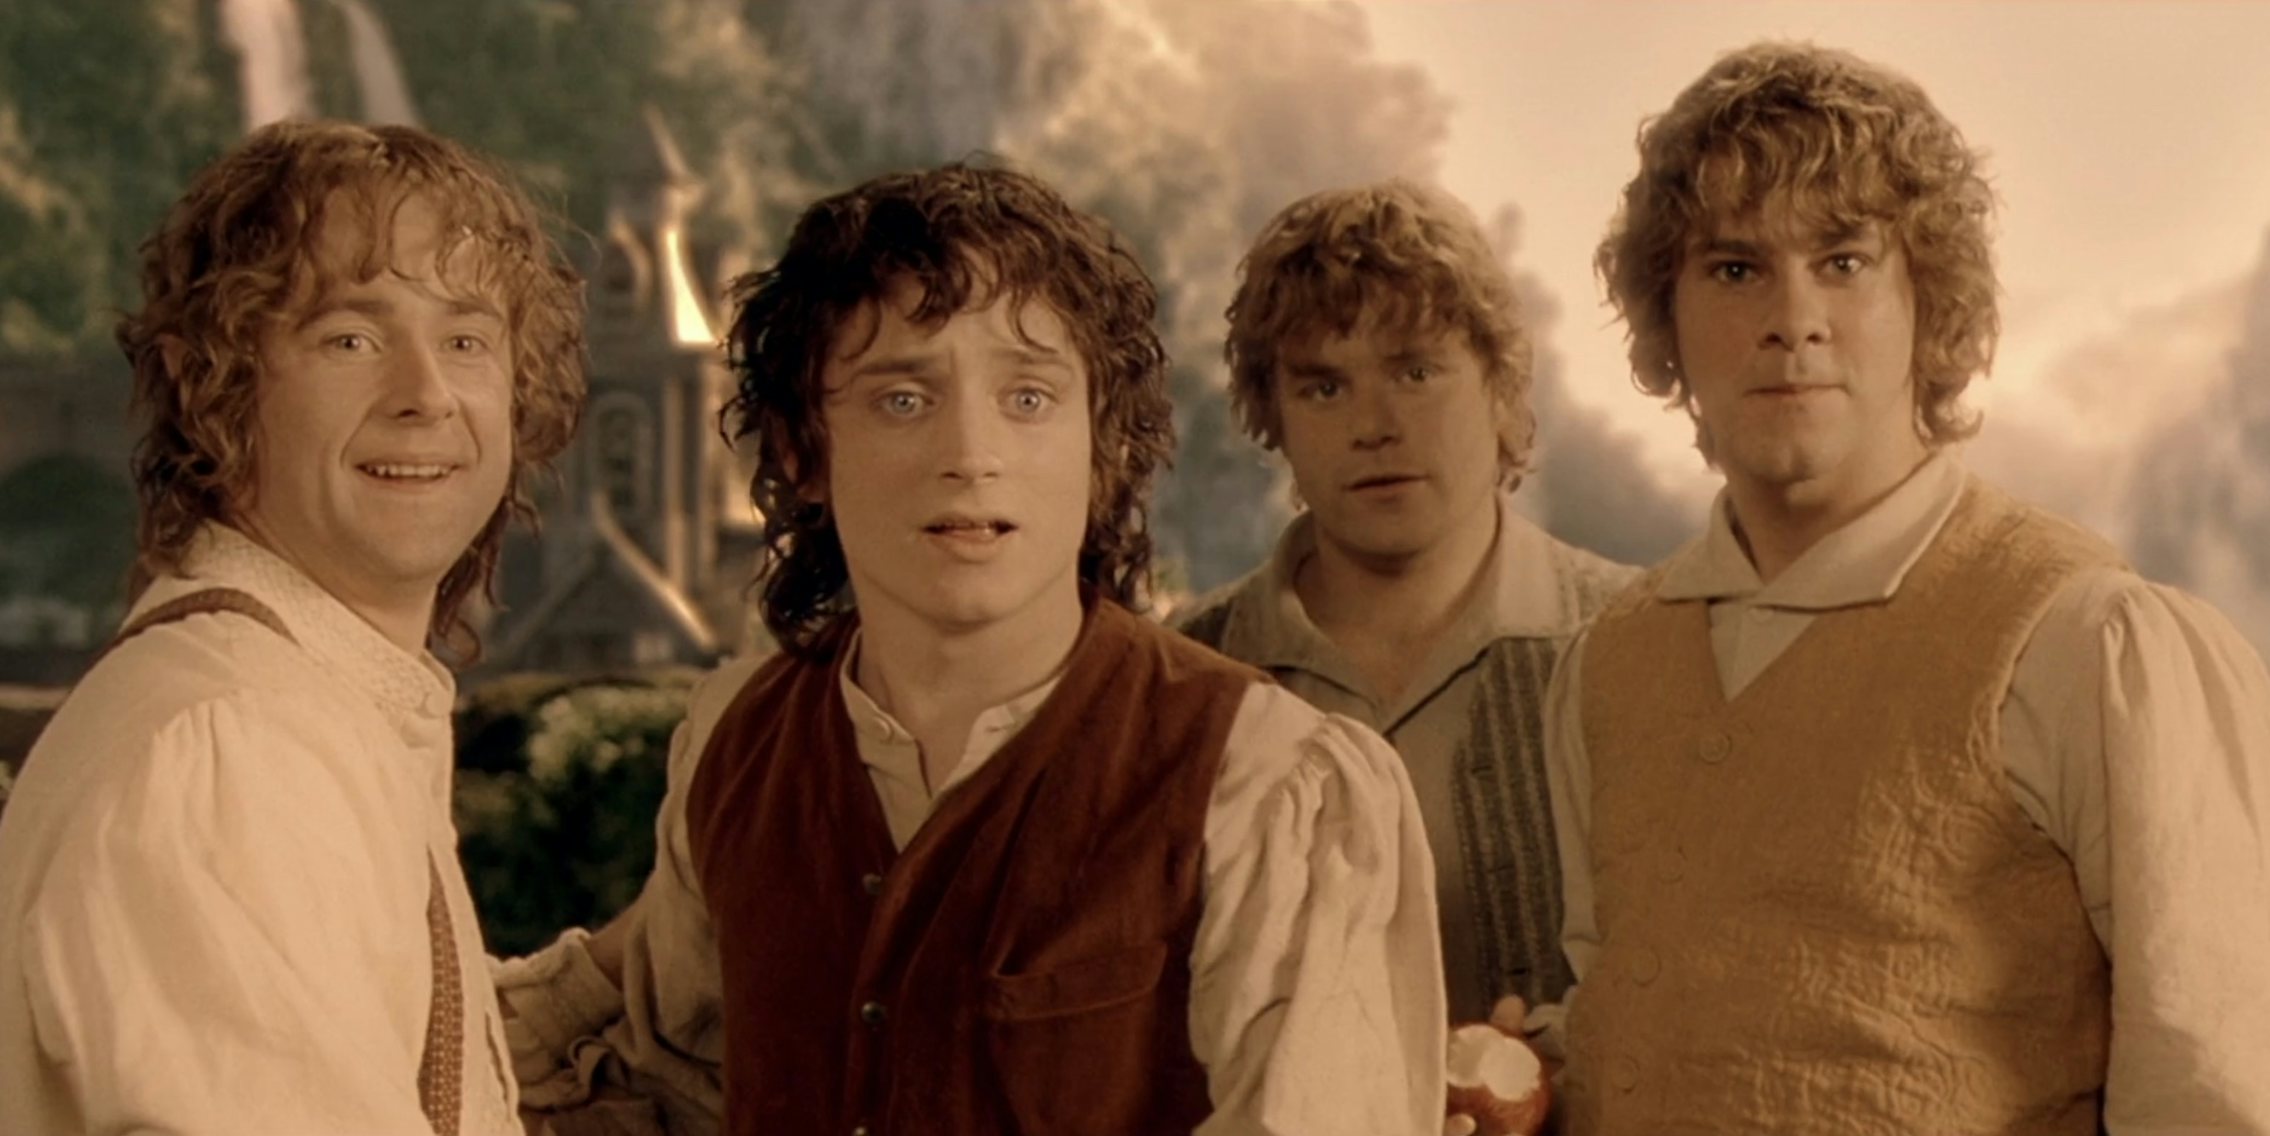 The Lord of the Rings' Fan Spots Incredible Movie Detail 20 Years